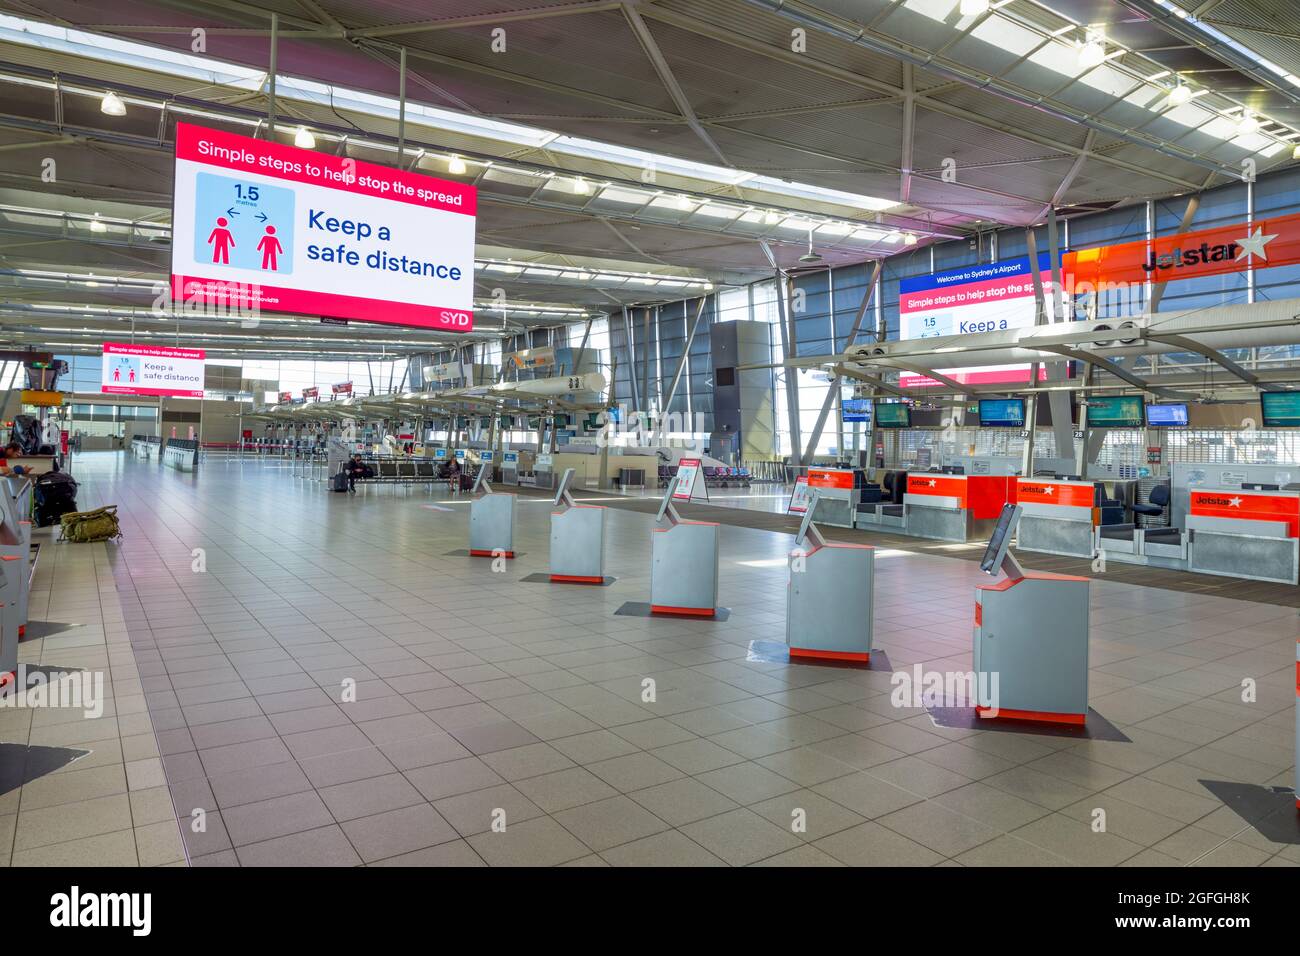 As Sydney, Australia, continues its lengthy coronavirus lockdown, Sydney Airport looks deserted due to closed borders and travel restrictions. Stock Photo